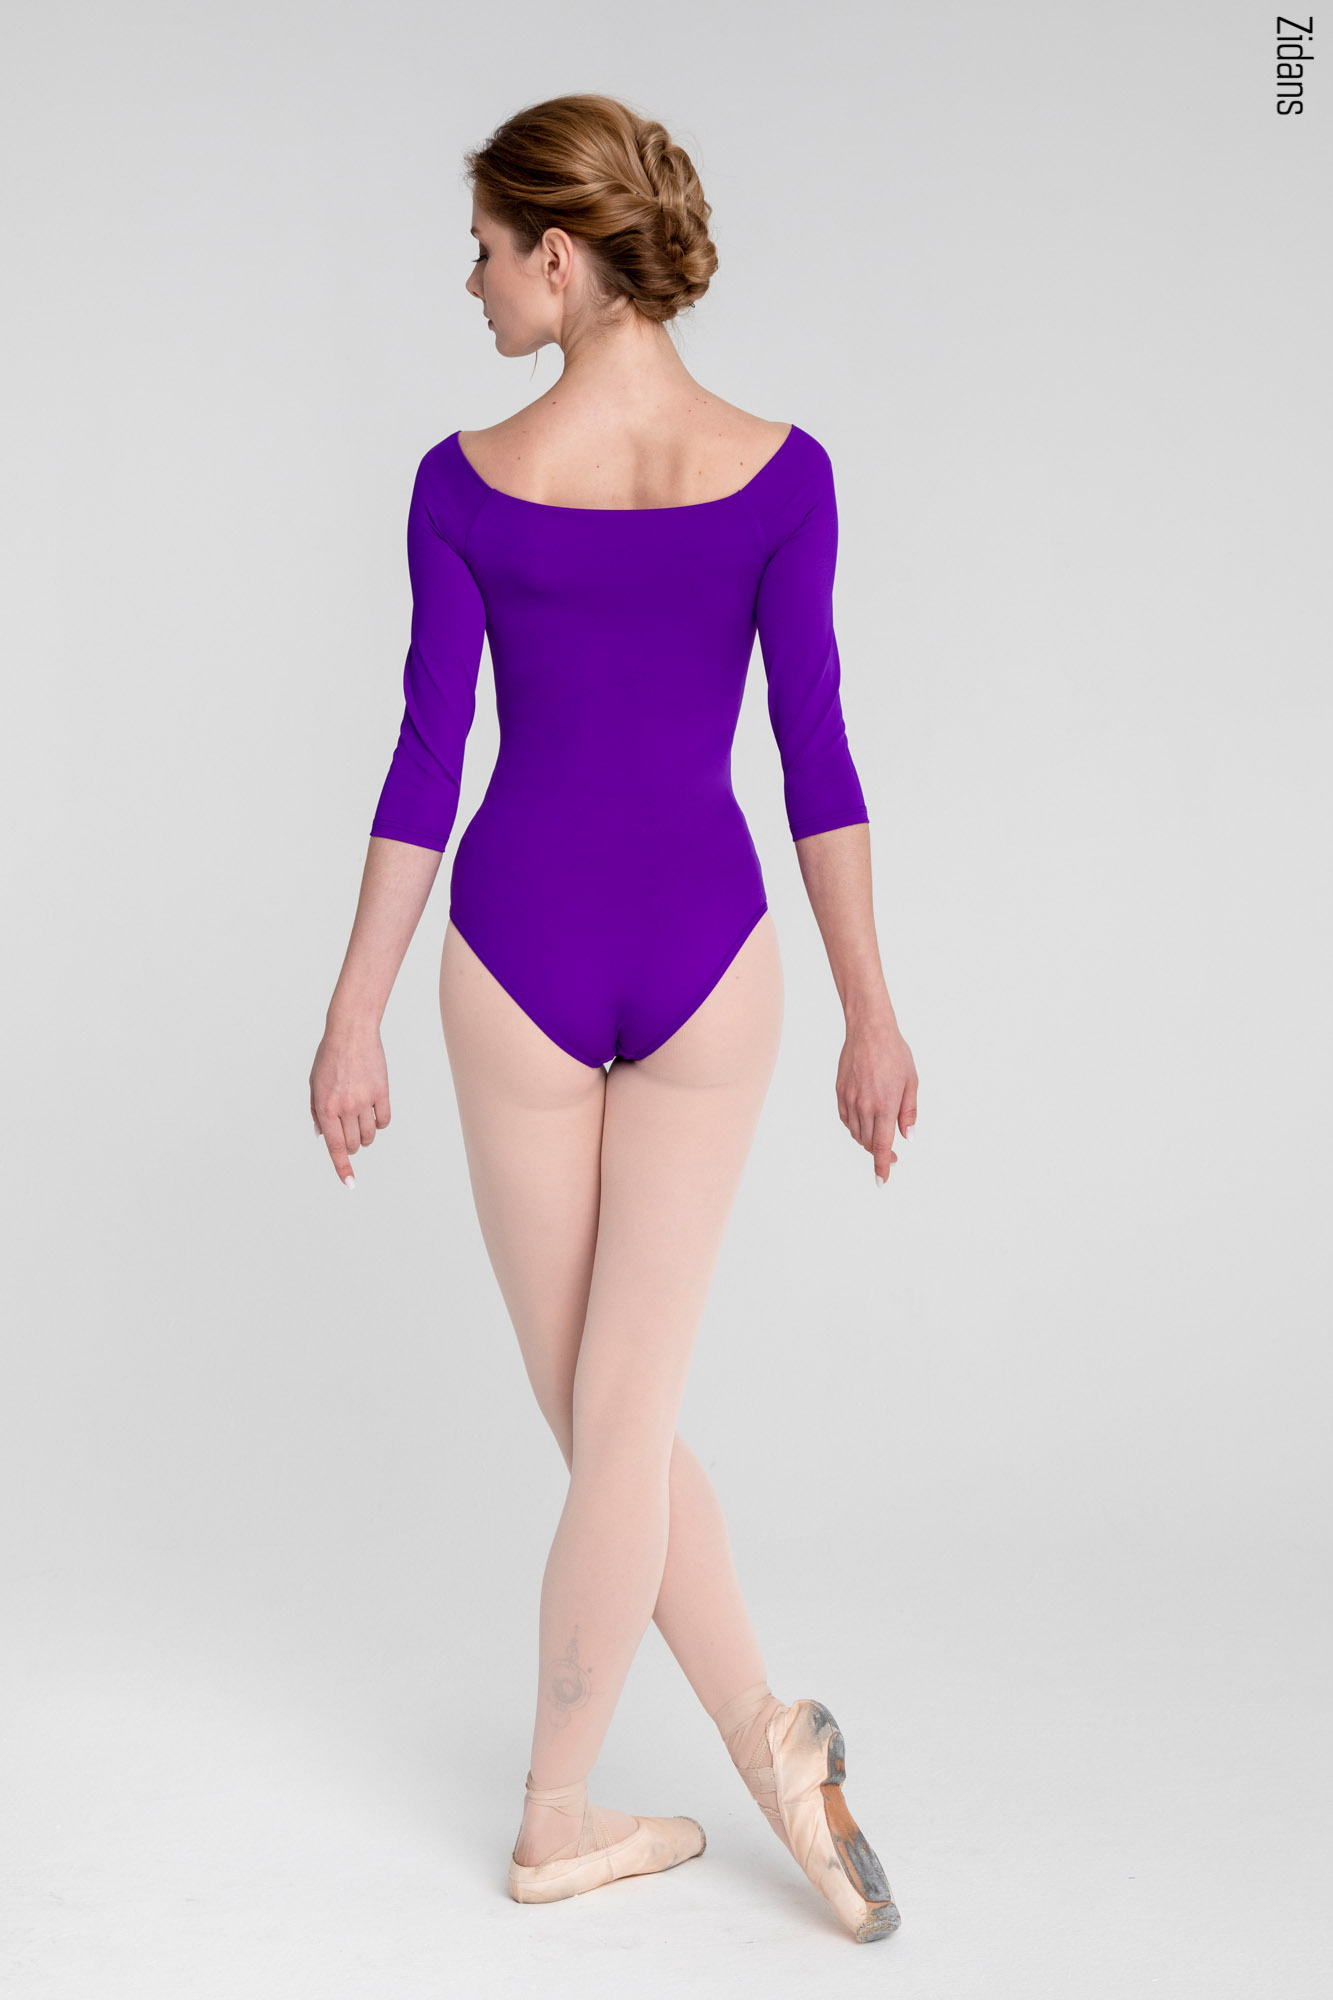 2 Sleeves leotard for ballet and dance